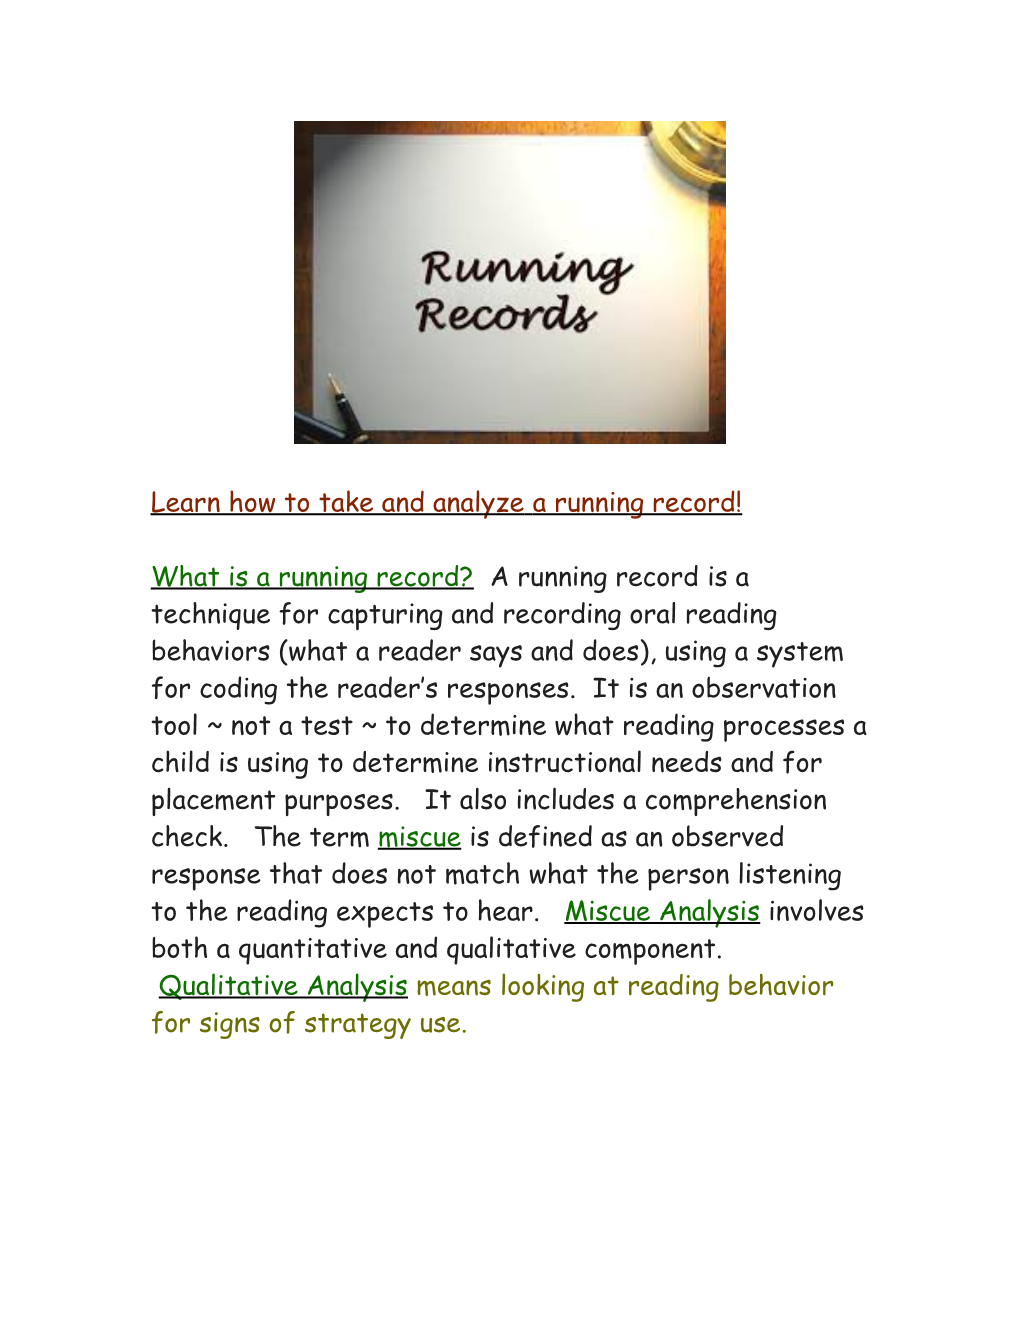 Learn How to Take and Analyzea Running Record!